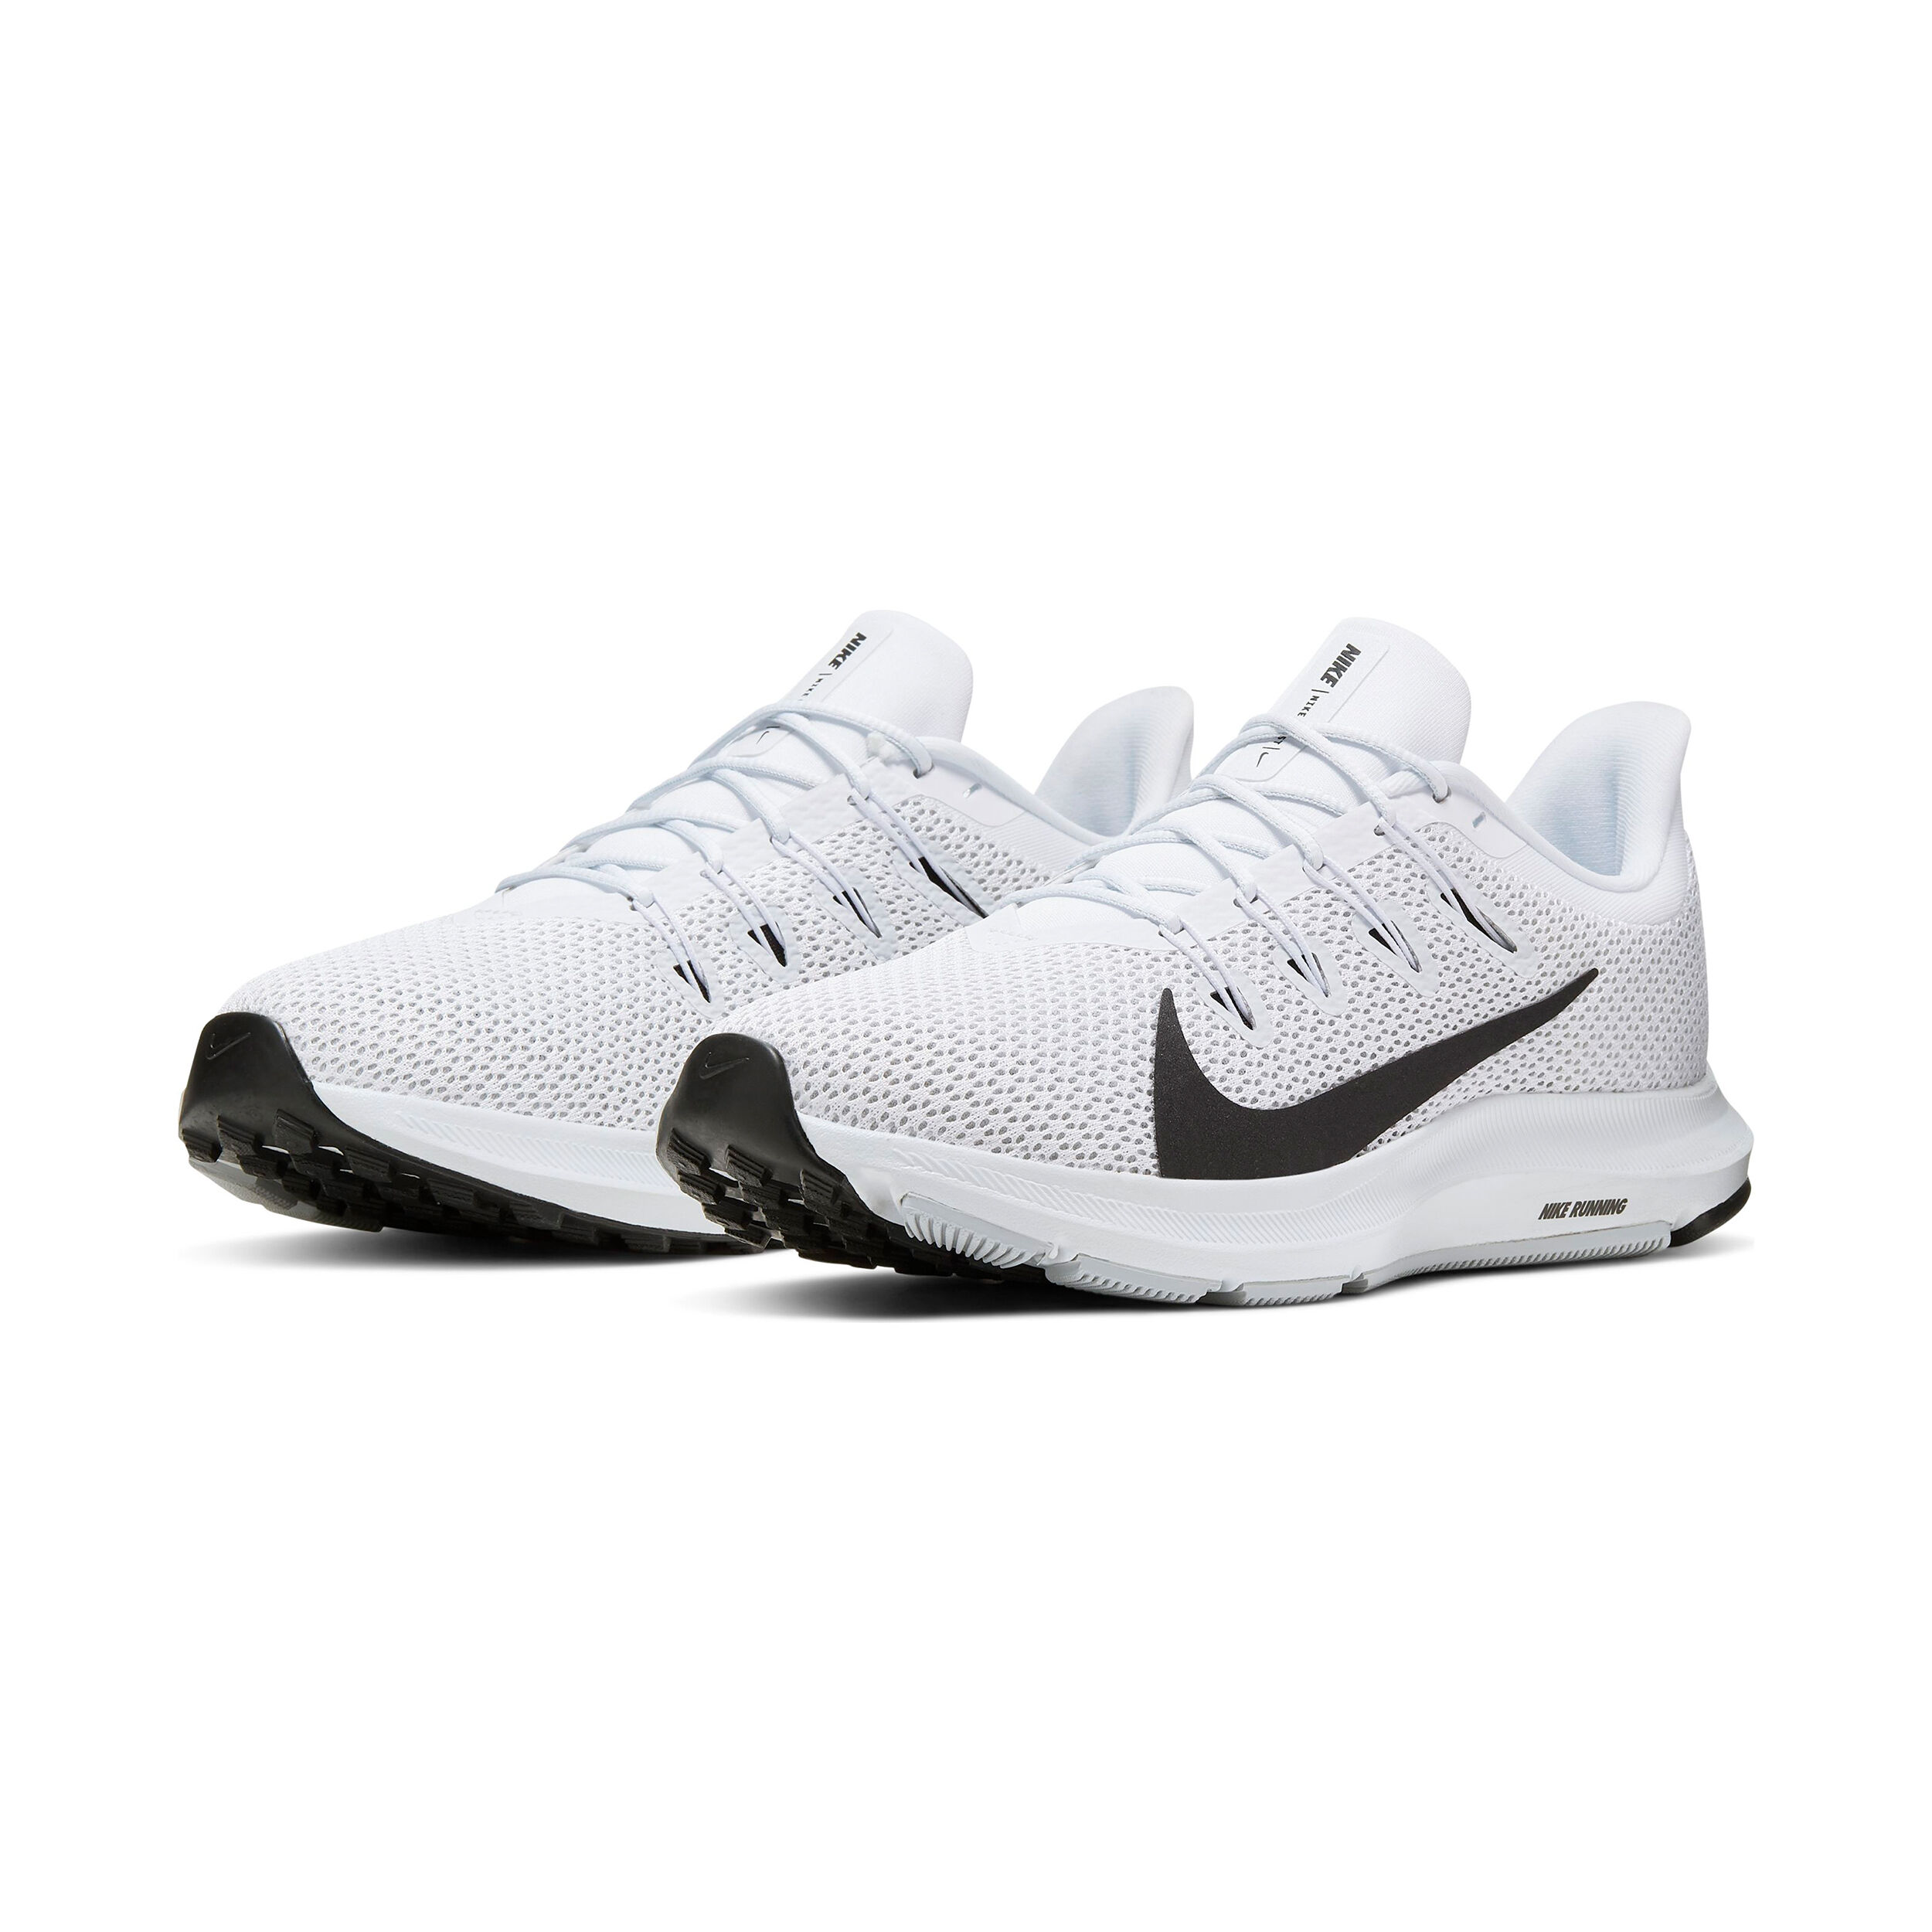 nike quest 2 women's black and white